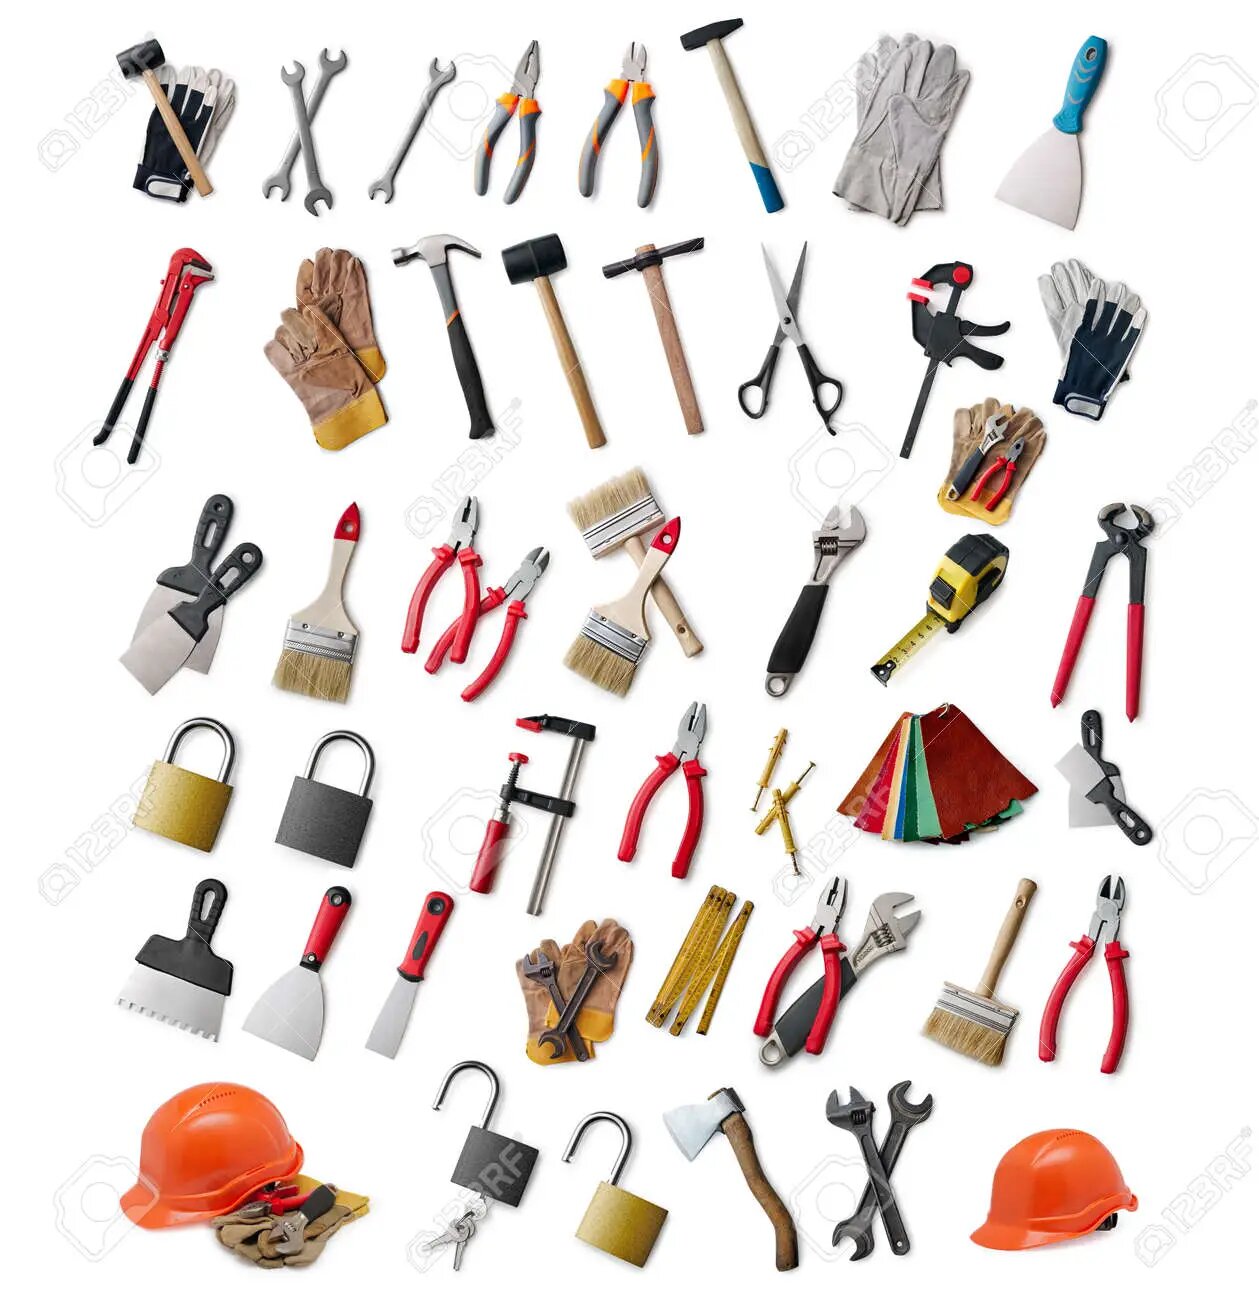 38737524-large-selection-of-assorted-different-hand-tools-and-safety-gear-for-diy-construction-maintenance-an